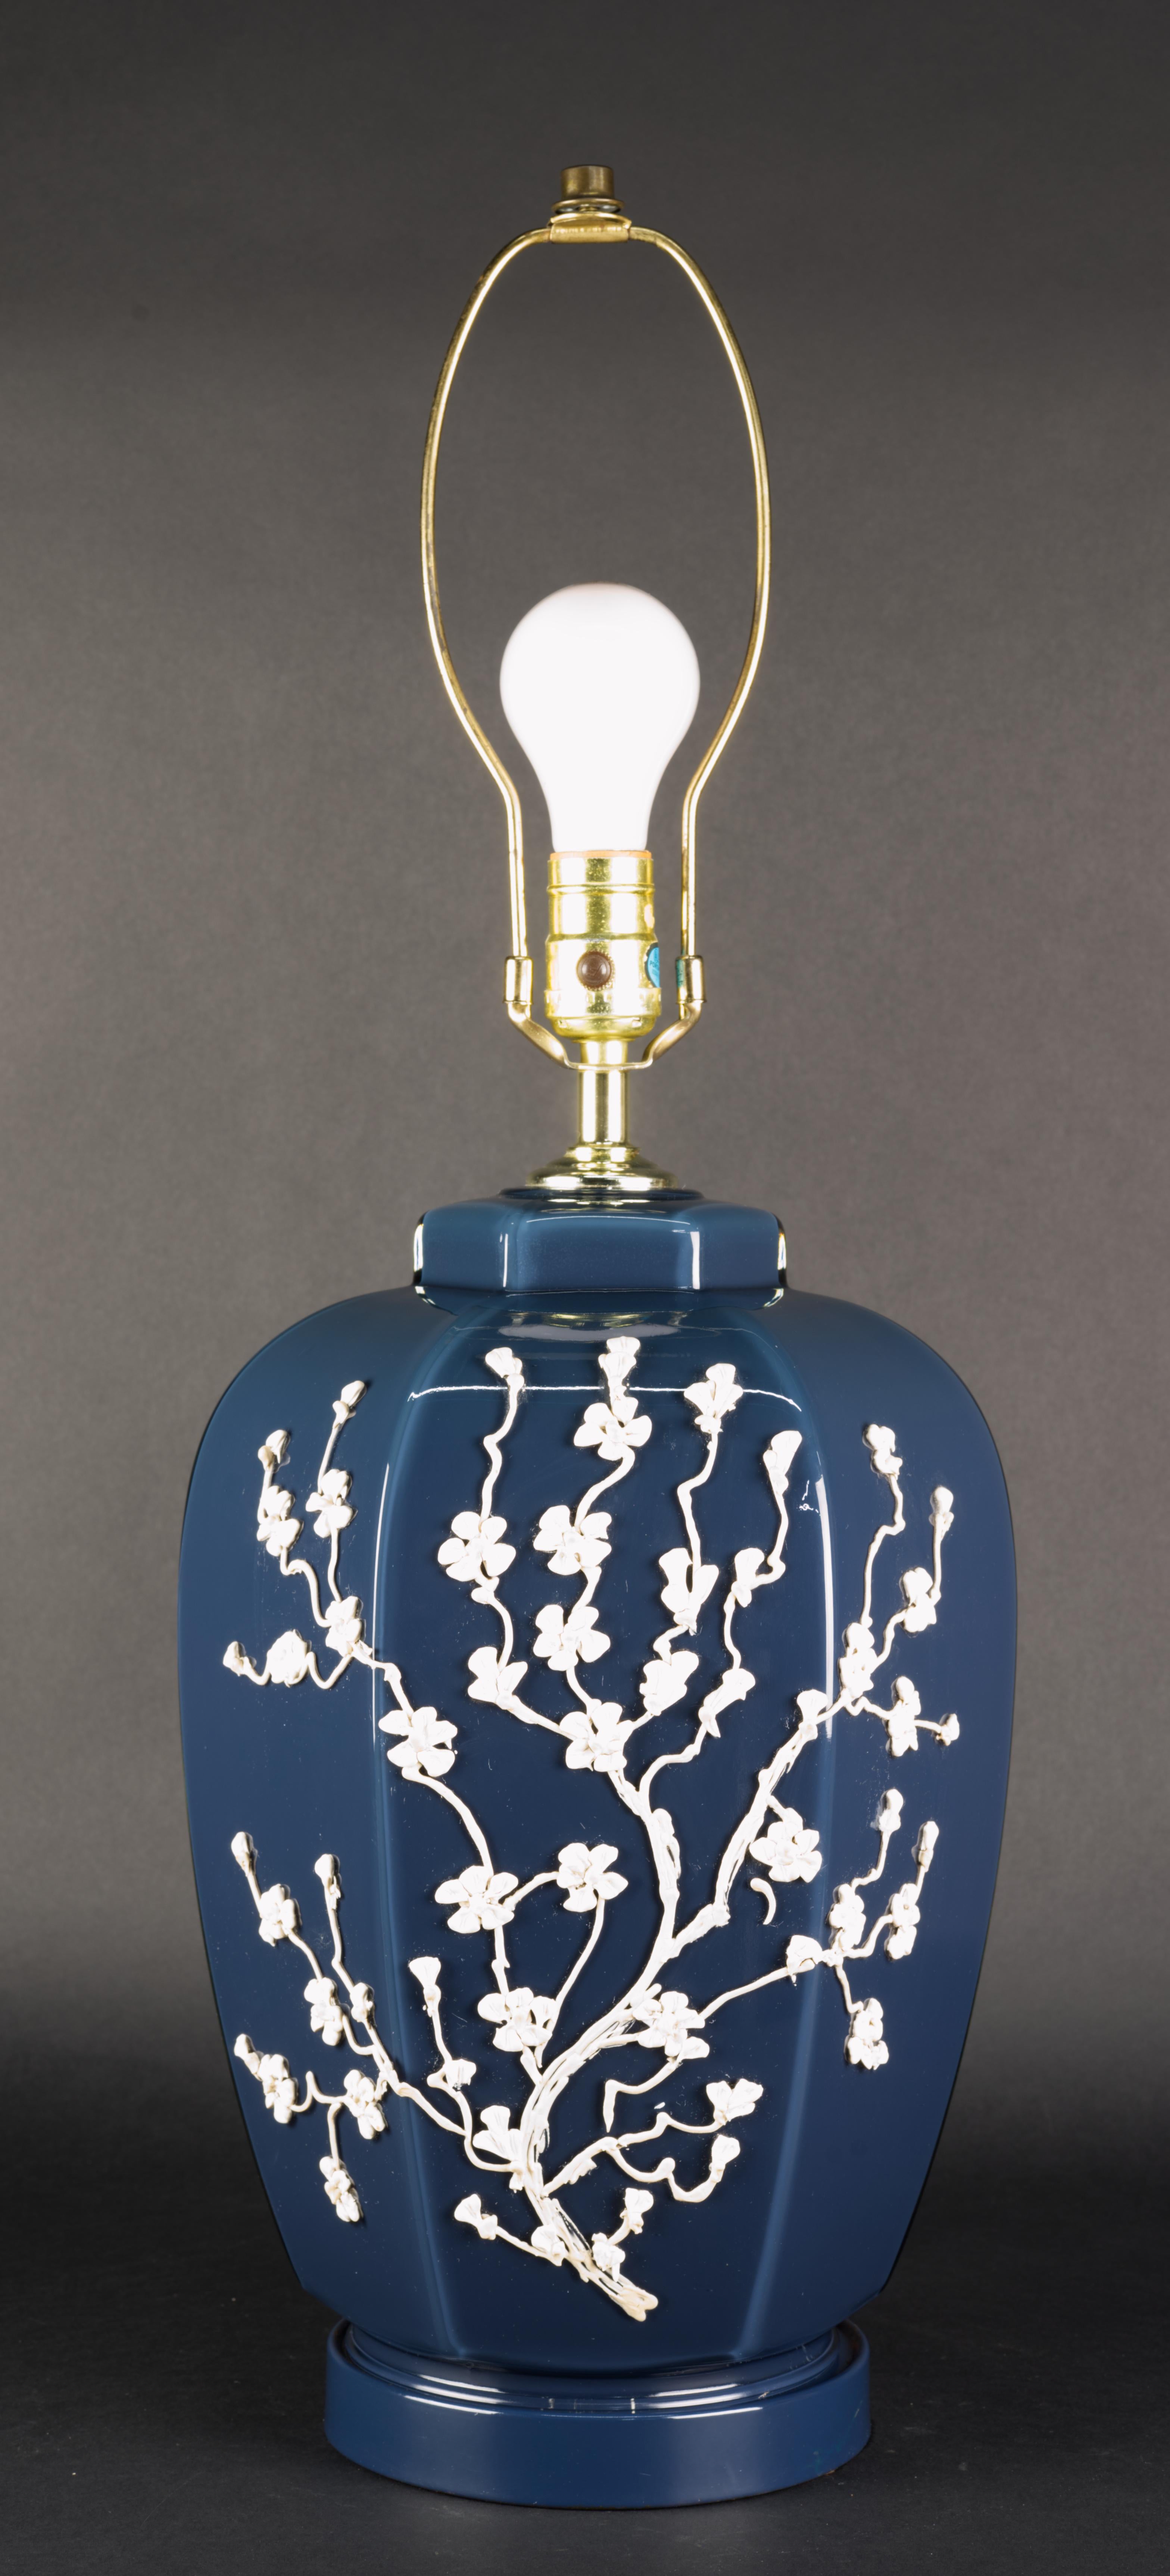  Rare postmodern table lamp is decorated with white flowering branches designs on deep blue glass body. The lamp stands on enameled metal base that matches the color of the glass, creating a visual flow and continuity.
Socket is a 3-way.

The lamp